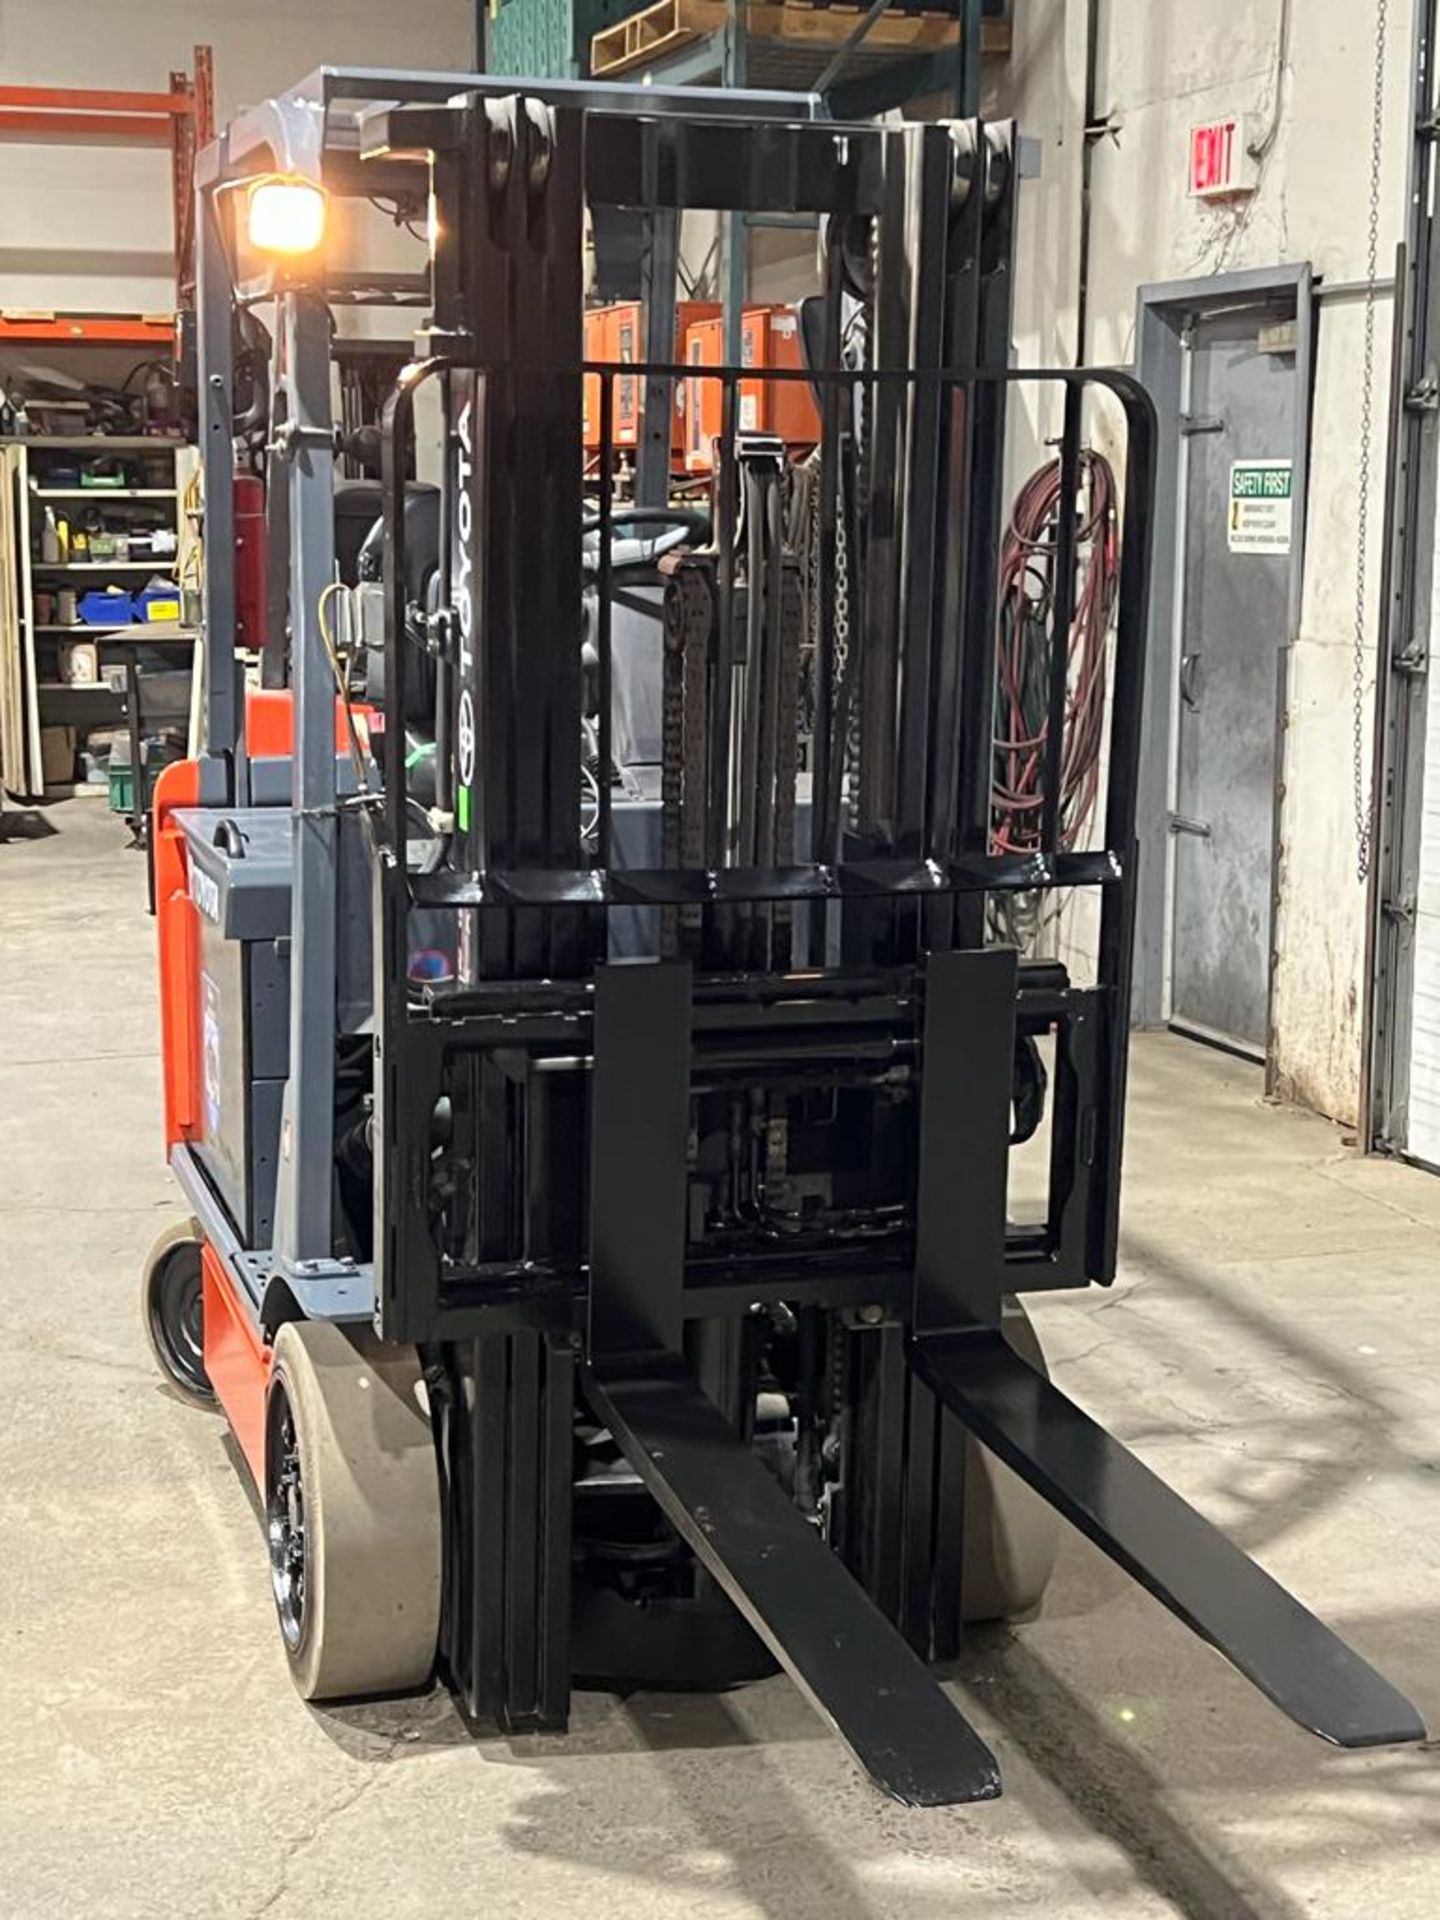 2014 Toyota 5,000lbs Capacity Electric Forklift with sideshift and 3-STAGE MAST - FREE CUSTOMS - Image 3 of 3